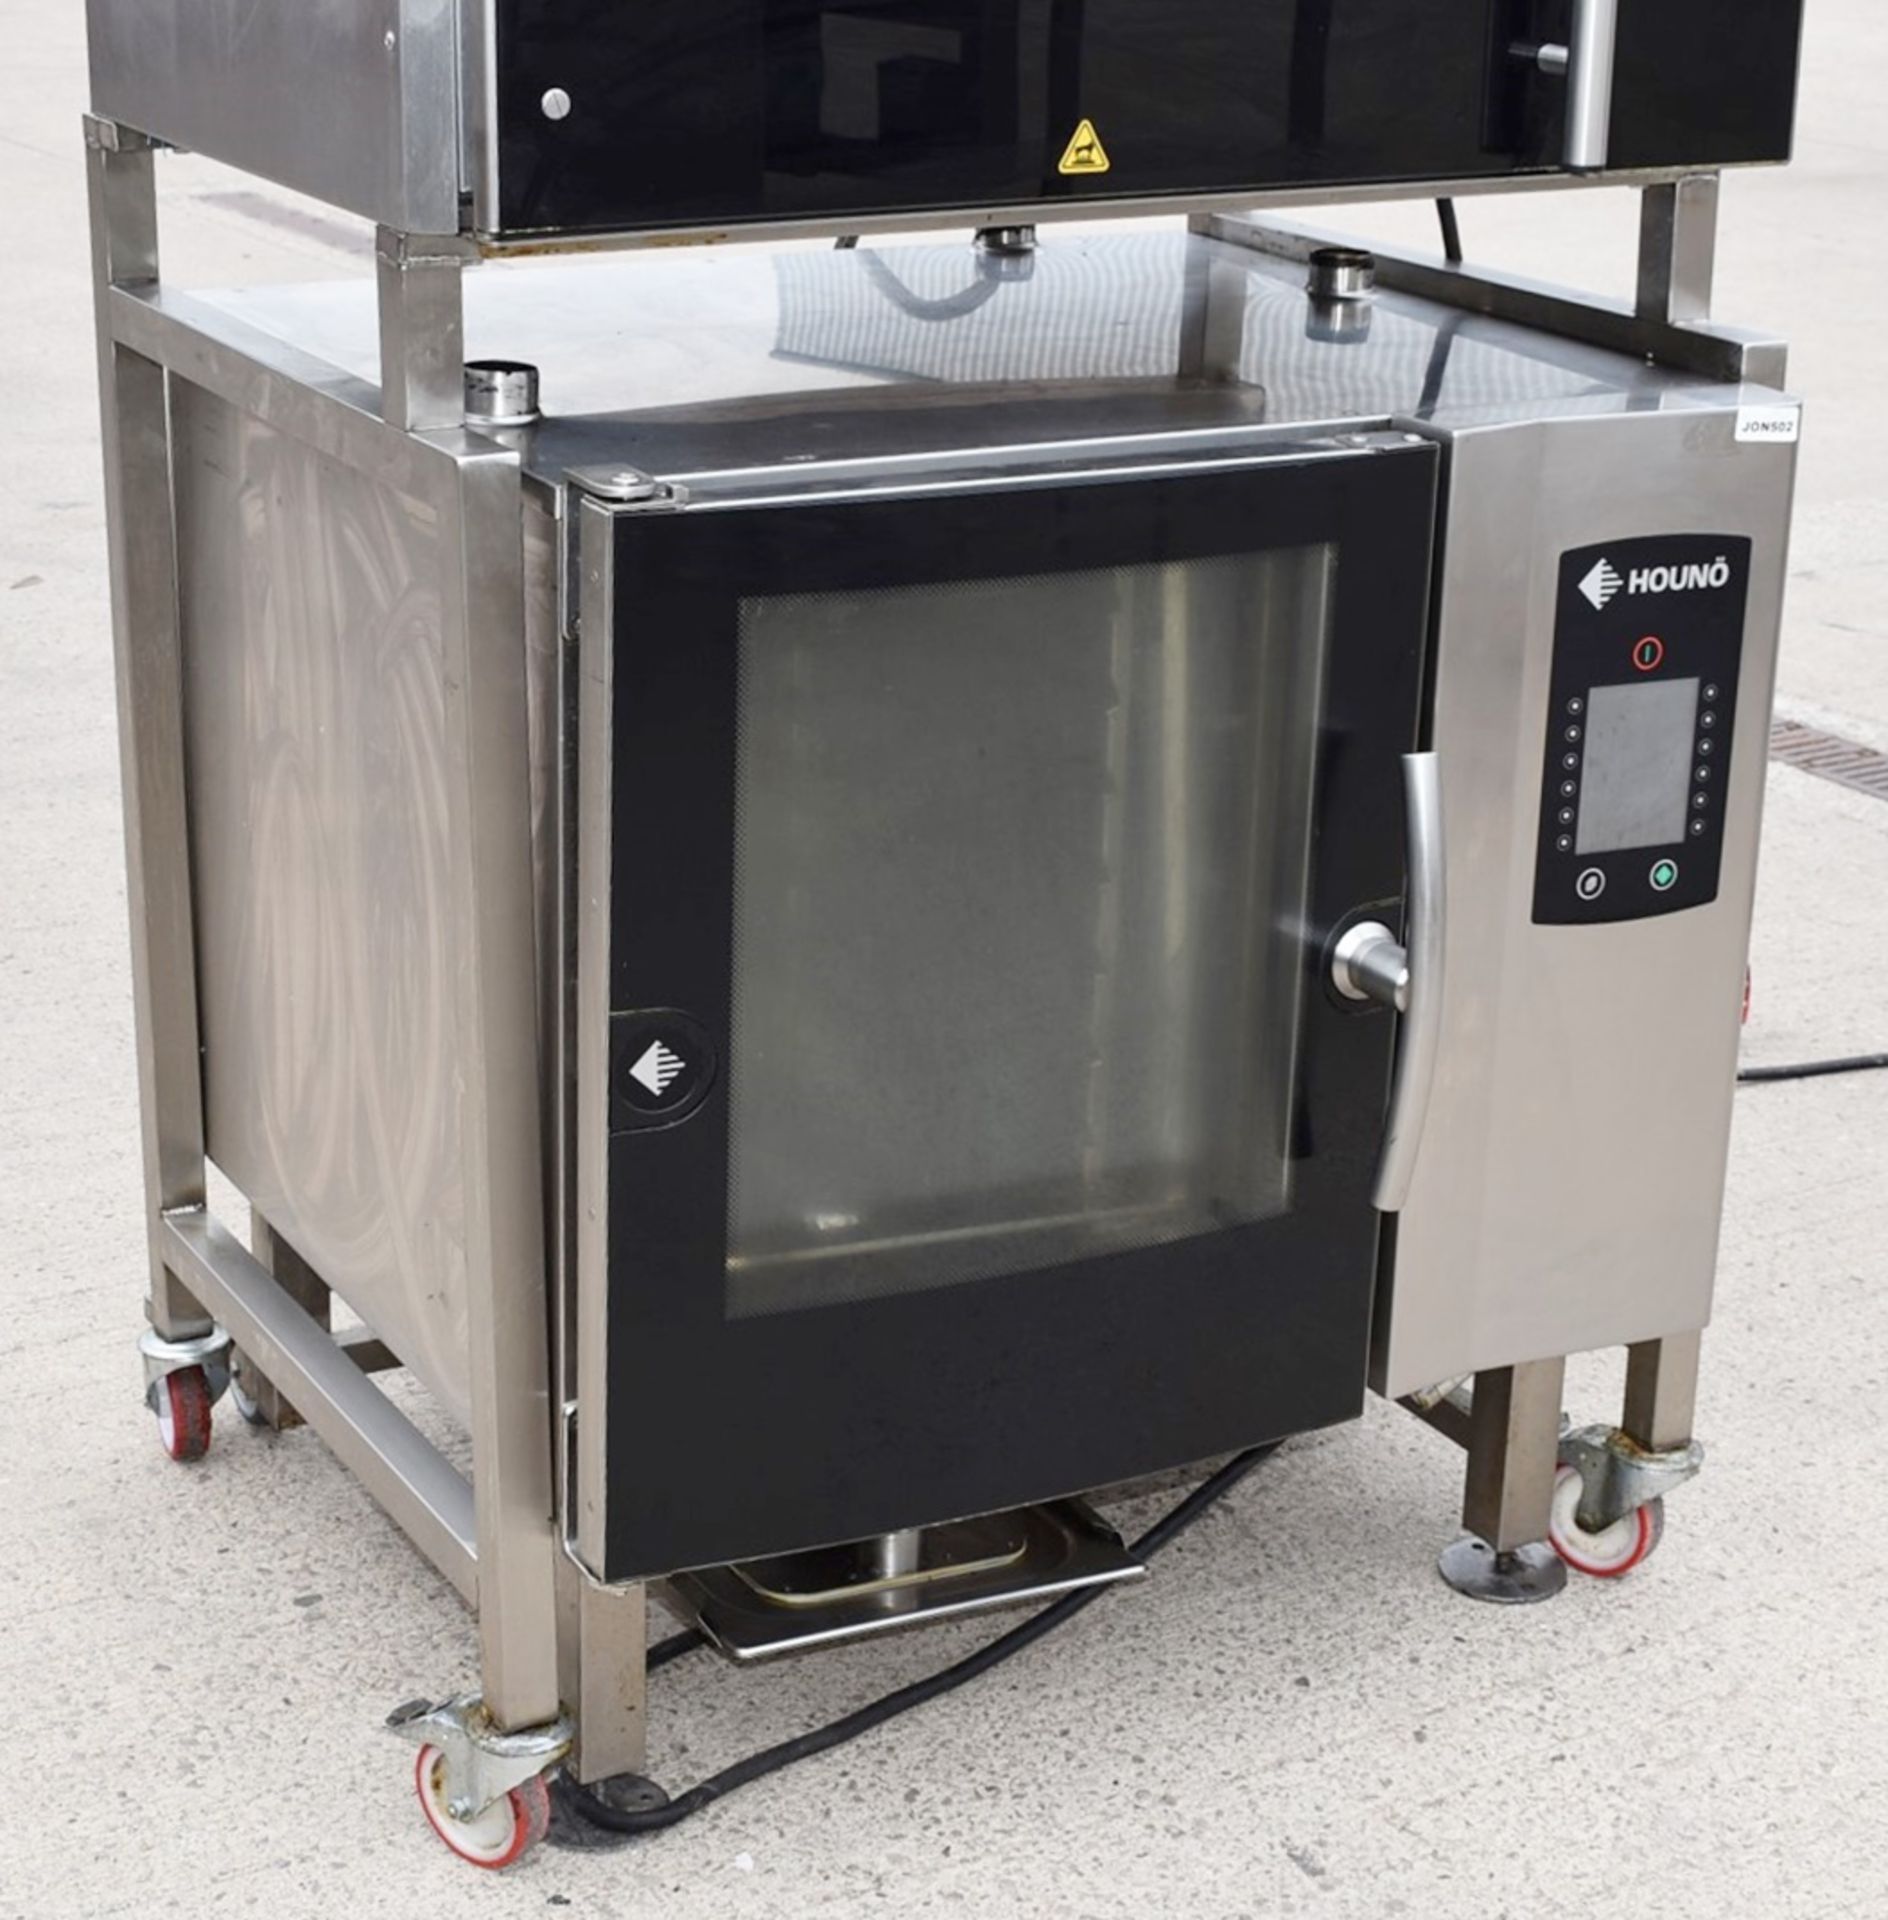 1 x Houno Electric Combi Oven and Fri-jado Rotisserie Oven Combo With Stand - 3 Phase - Image 22 of 22